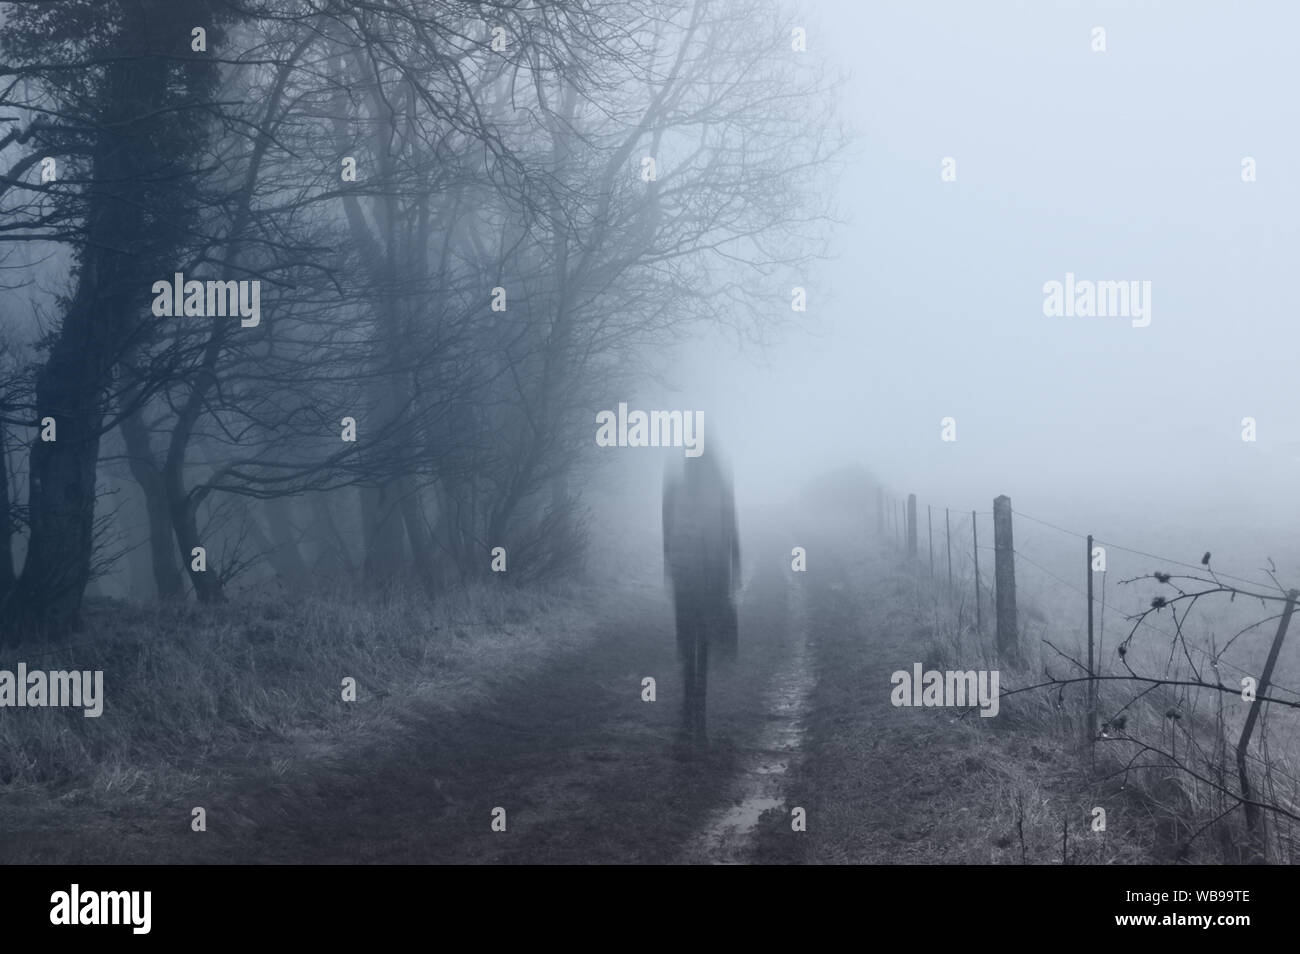 A ghostly woman walking along a country path on a spooky misty winters day. With a cold, blue edit. Stock Photo